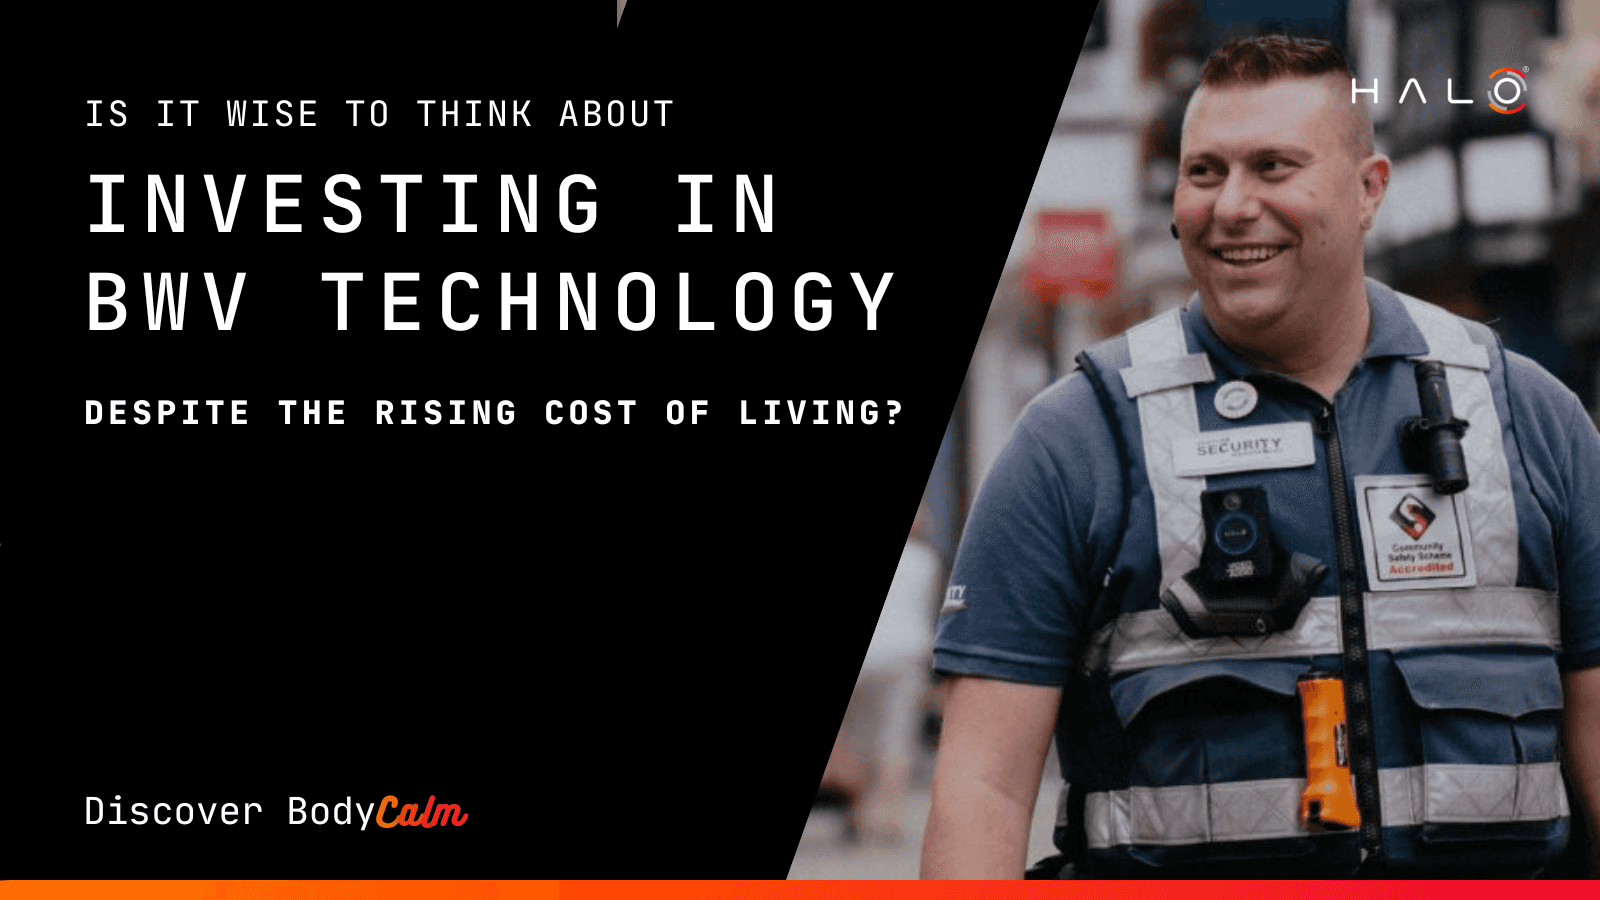 IS NOW THE TIME TO INVEST IN BODY-WORN TECHNOLOGY?